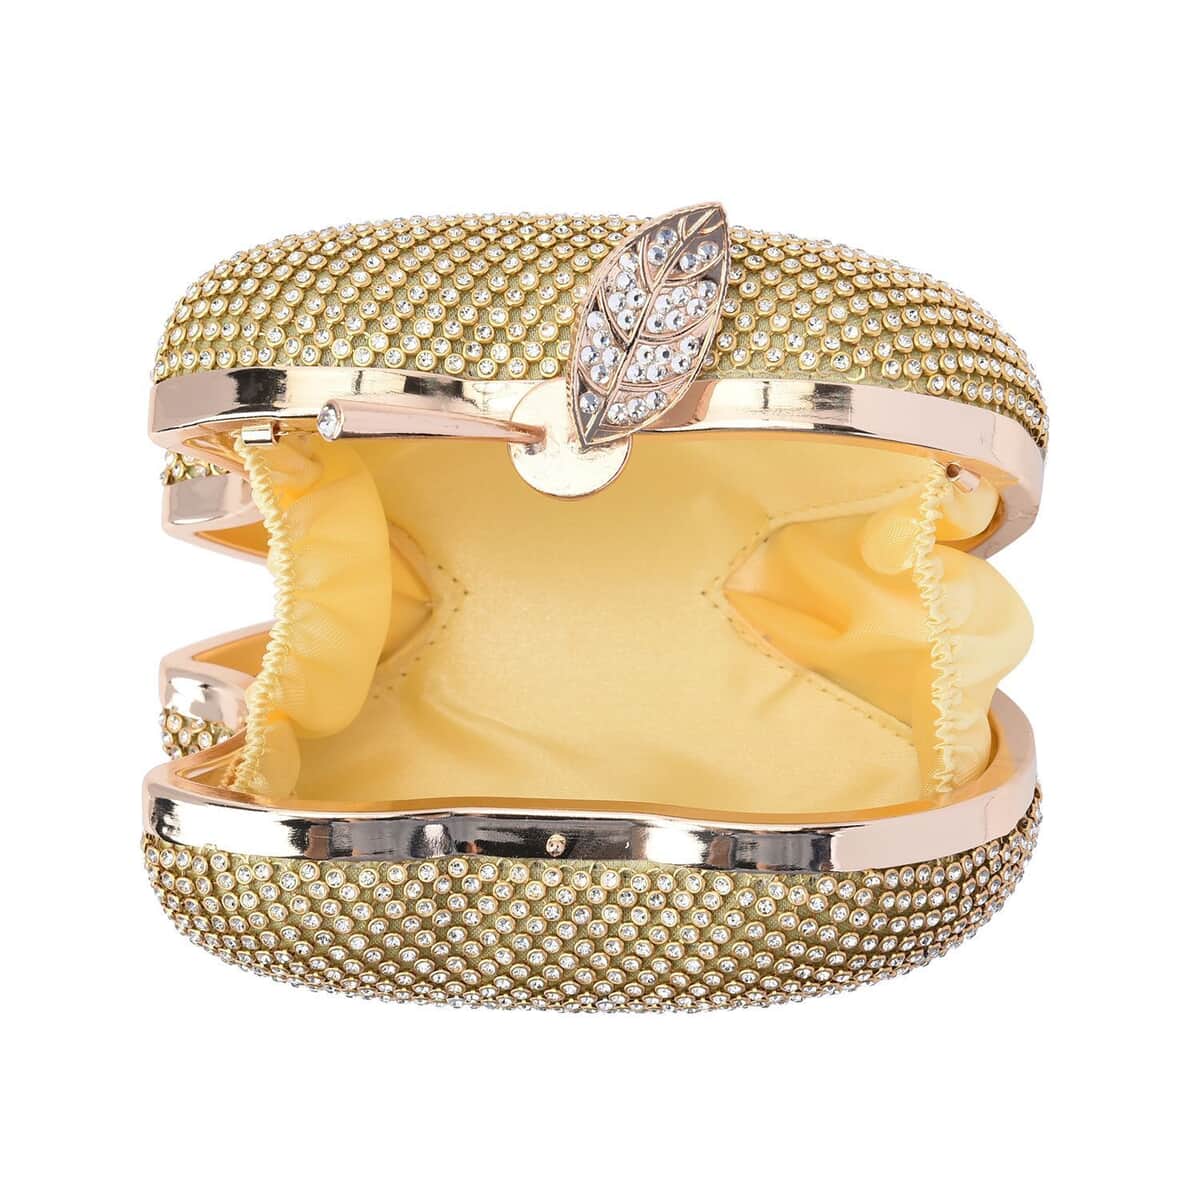 Gold Sparkling Crystal Bitten Apple Shape Clutch Bag with Detachable Chain image number 4